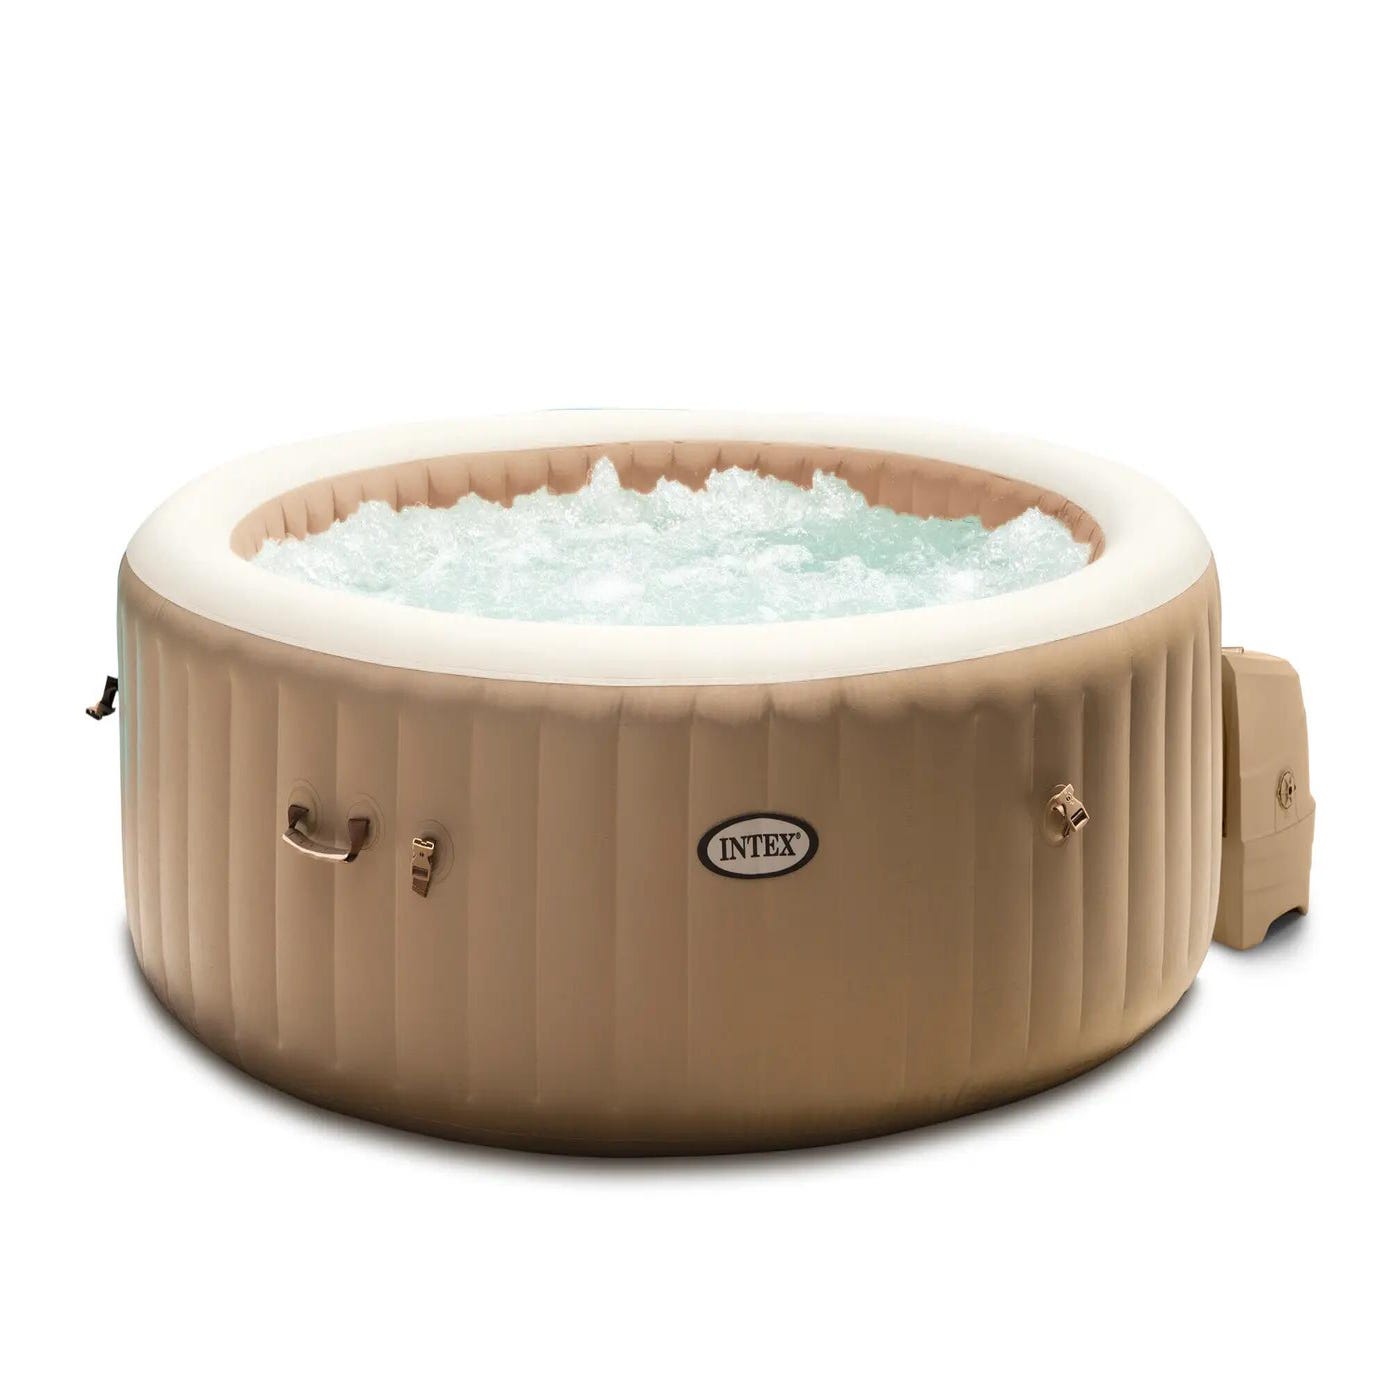 Pure Spa gonflable INTEX Sahara rond 6 places